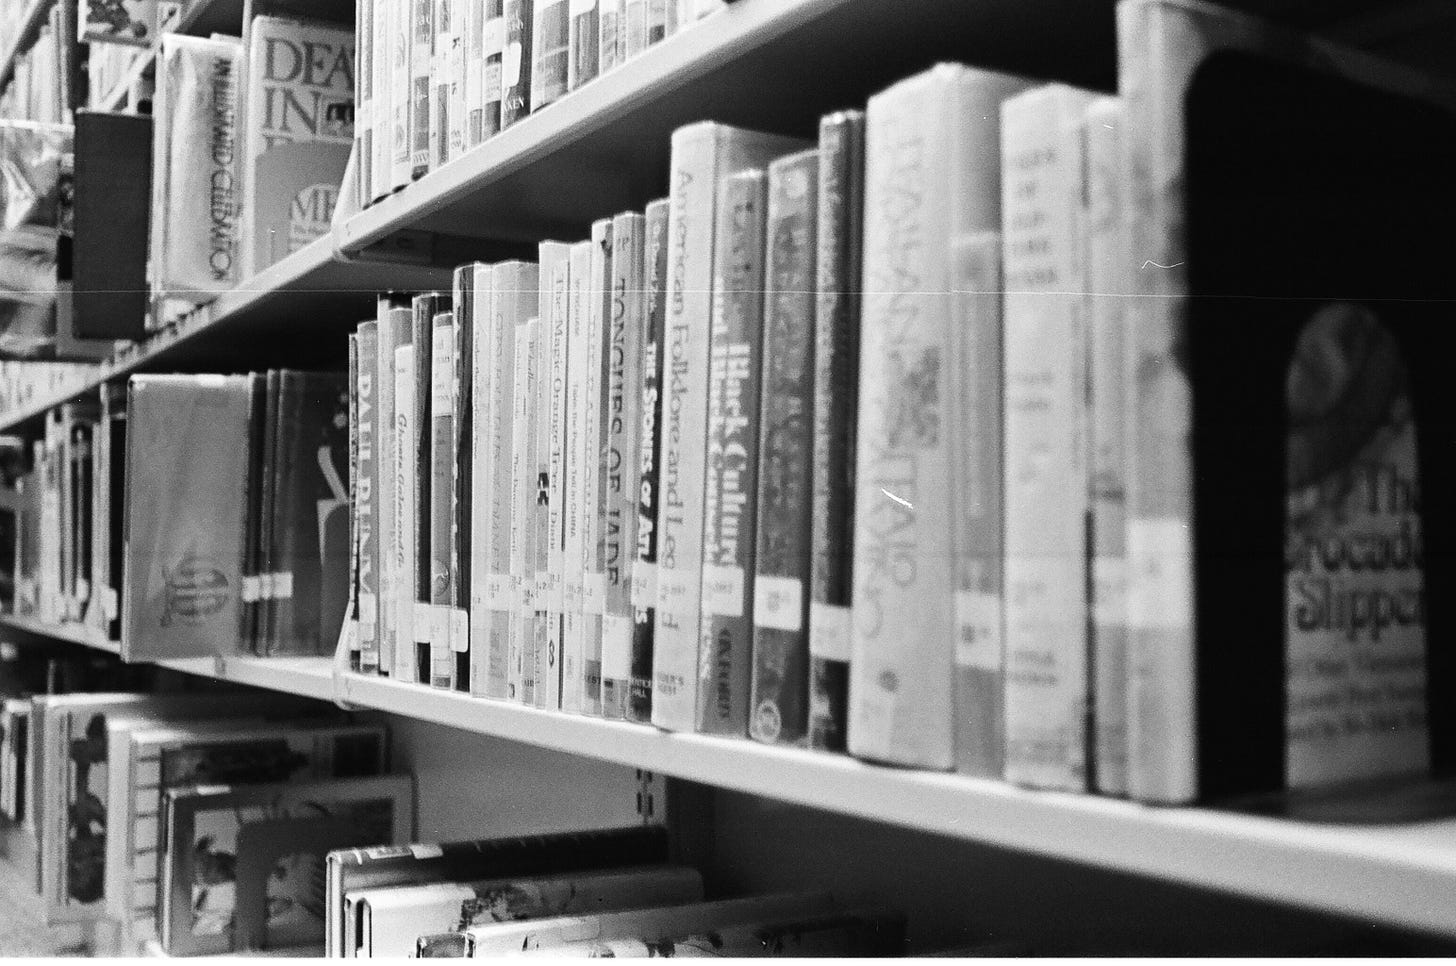 Row of library books in the stacks. Black and white. 